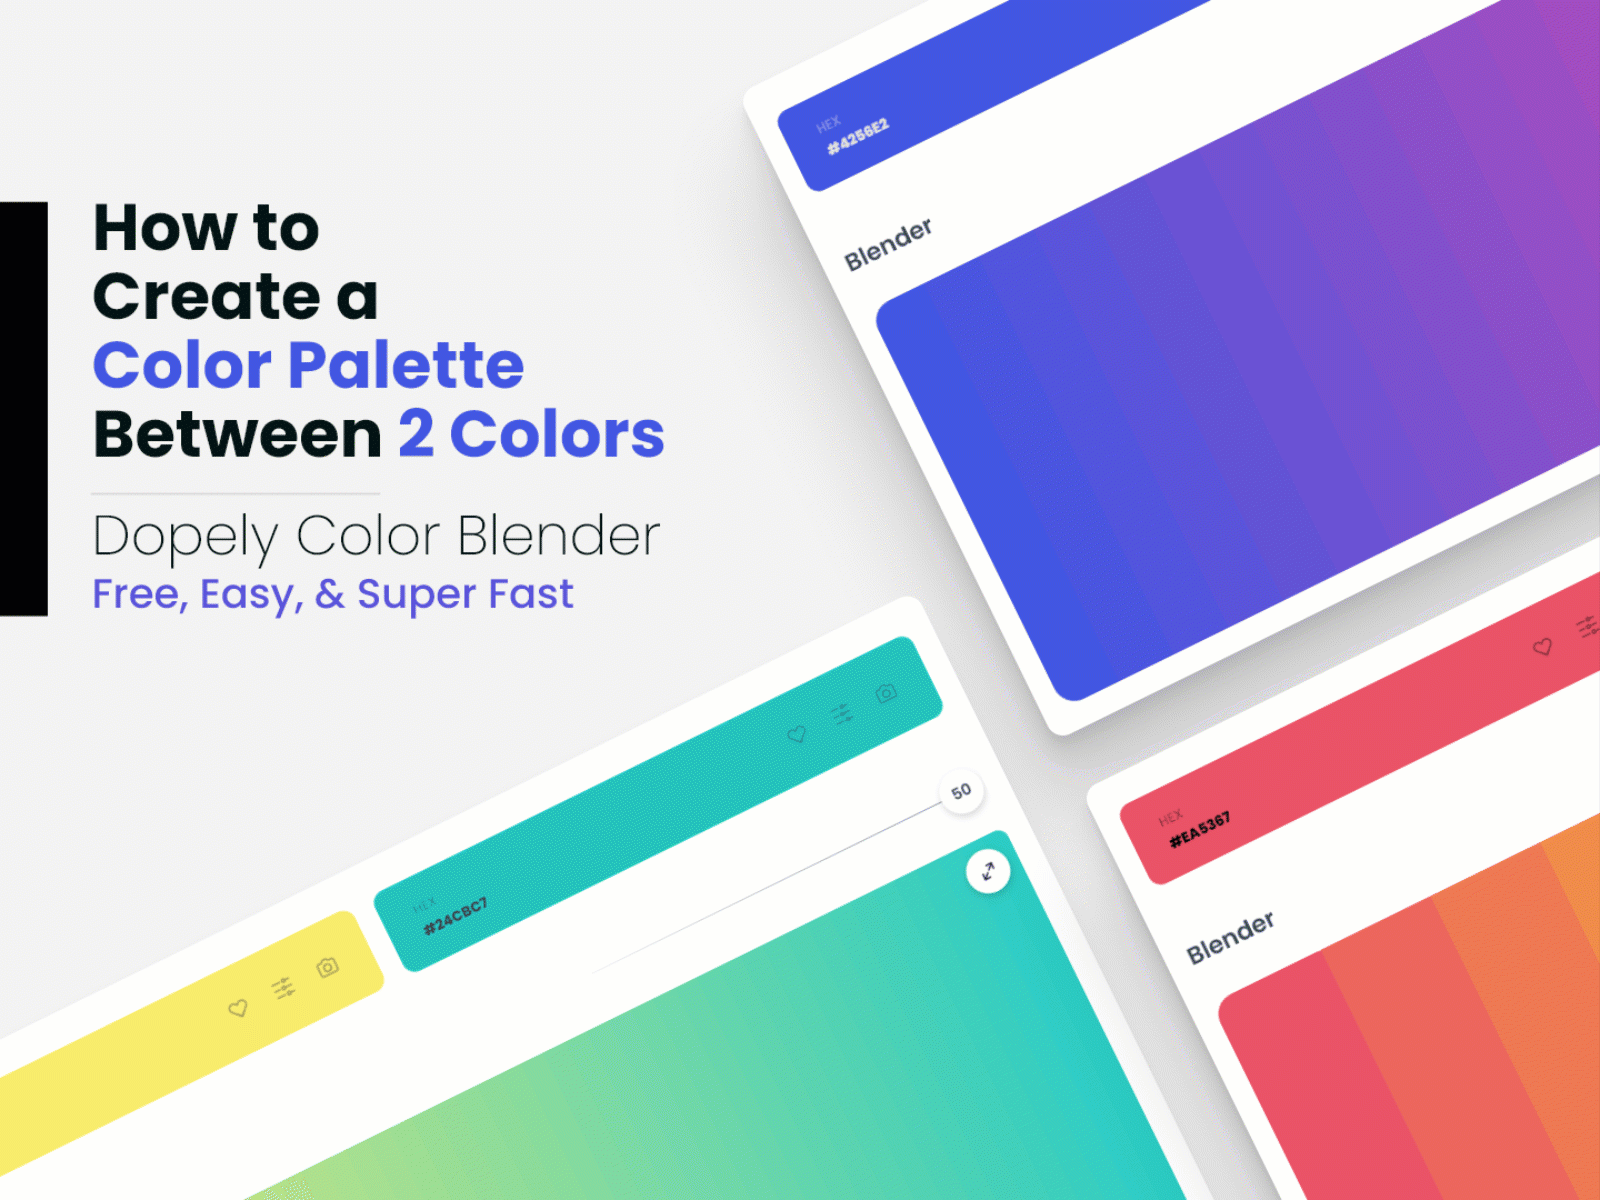 How to create a color palette between 2 colors by Dopely Colors